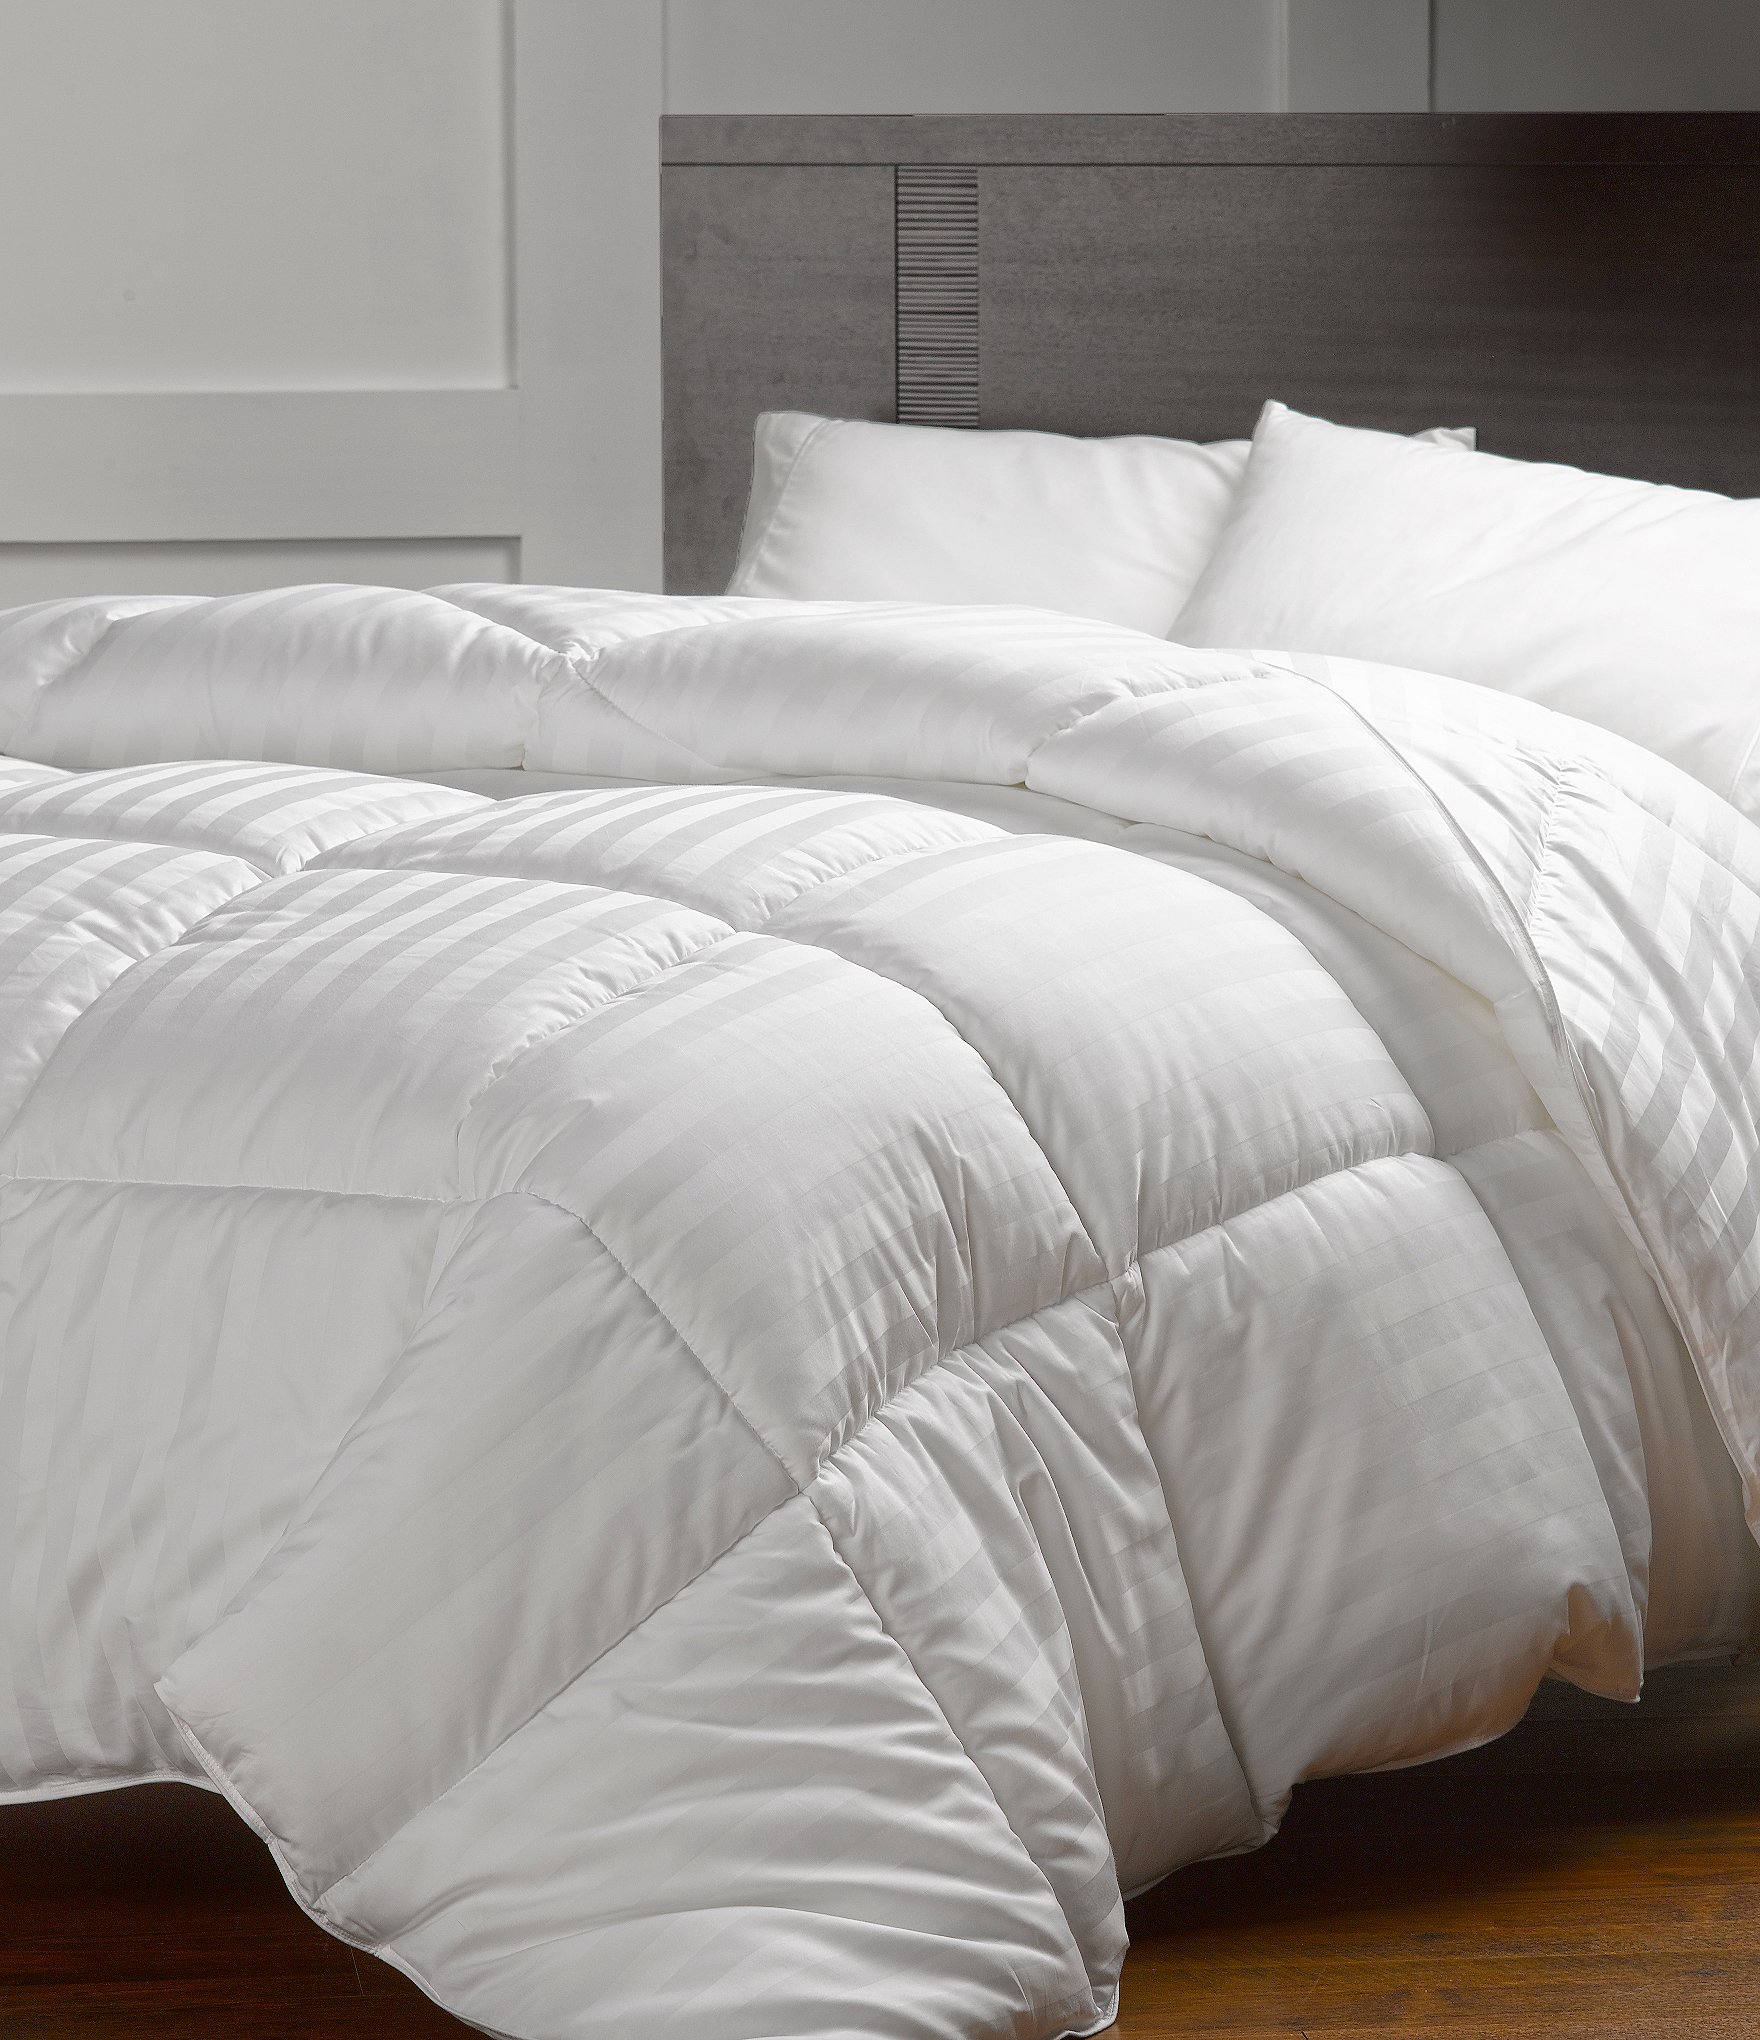 Noble Excellence Extra Warmth Down, How To Put A Down Comforter In Duvet Cover